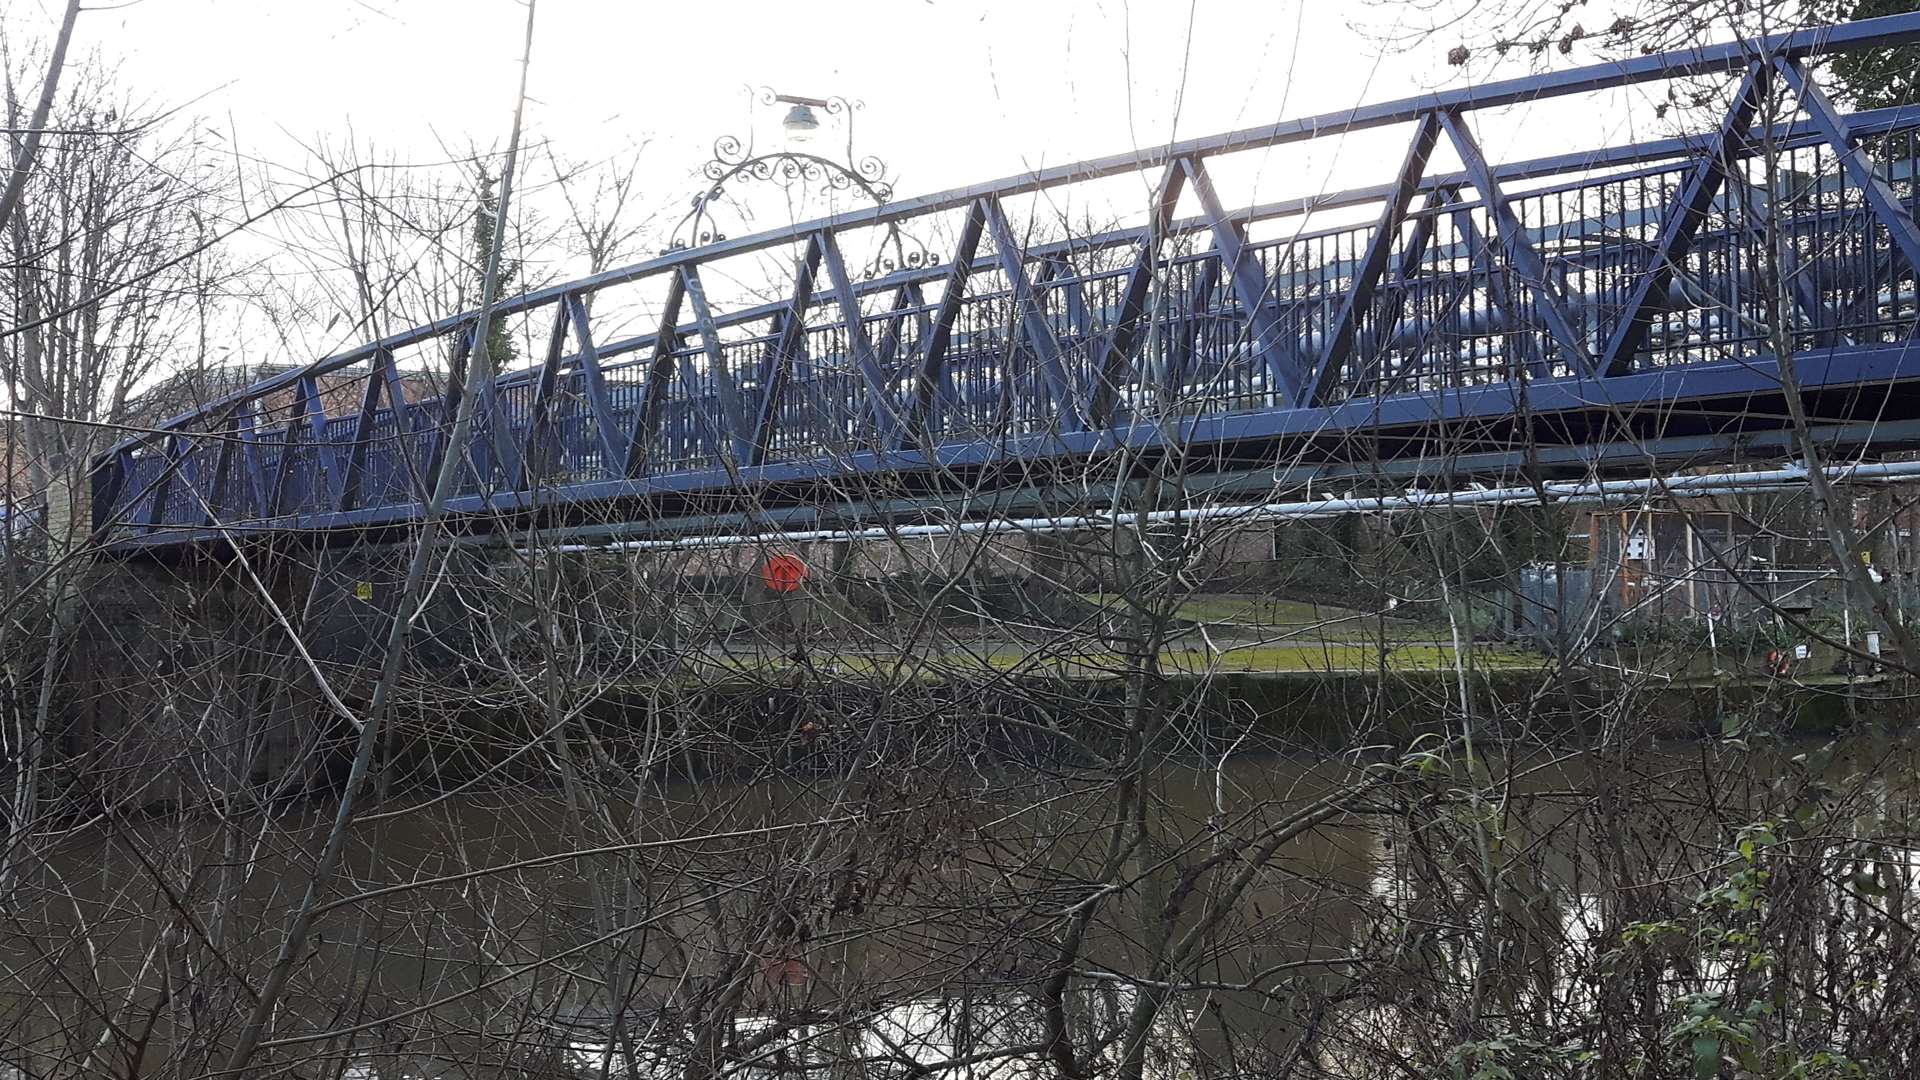 Tovil footbridge today, viewed from downstream on the Fant side